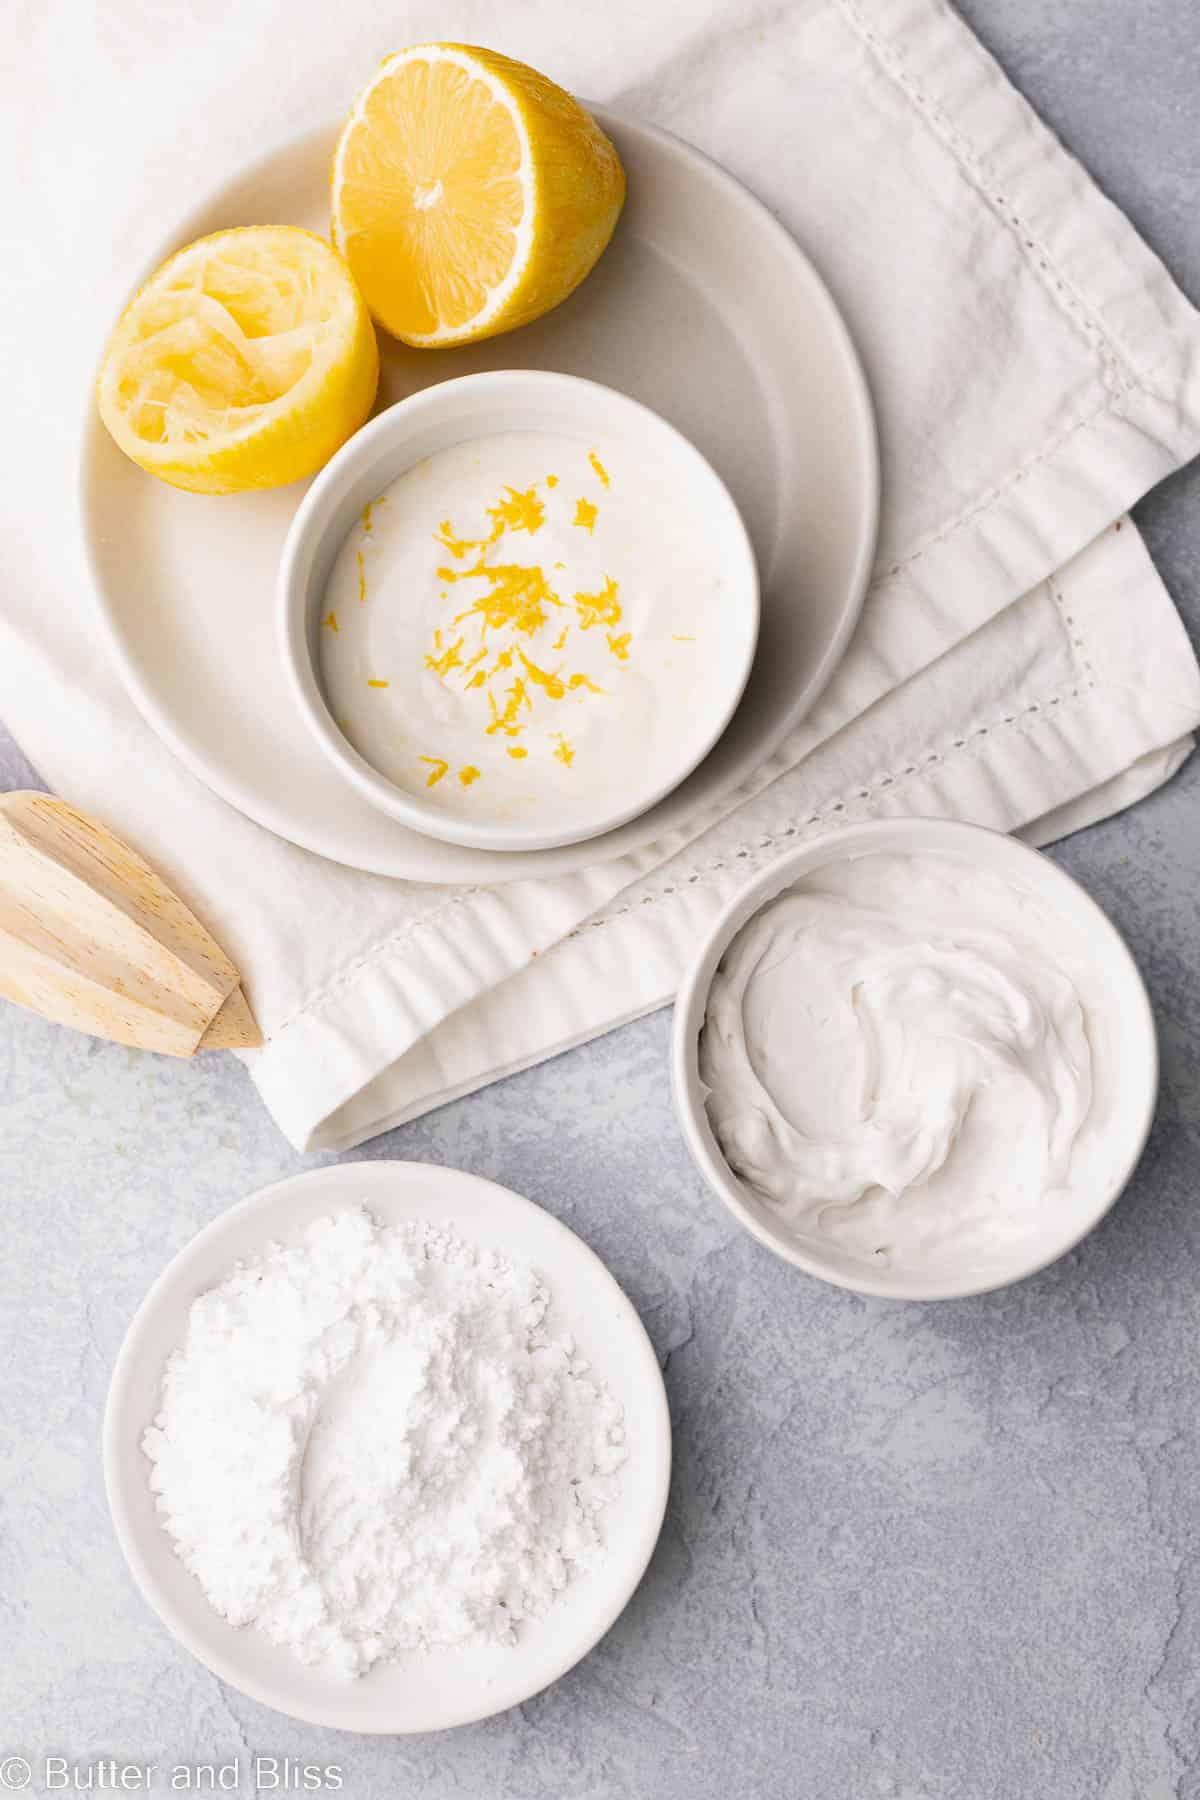 Creamy lemon glaze ingredients in small white bowls arranged on a table.